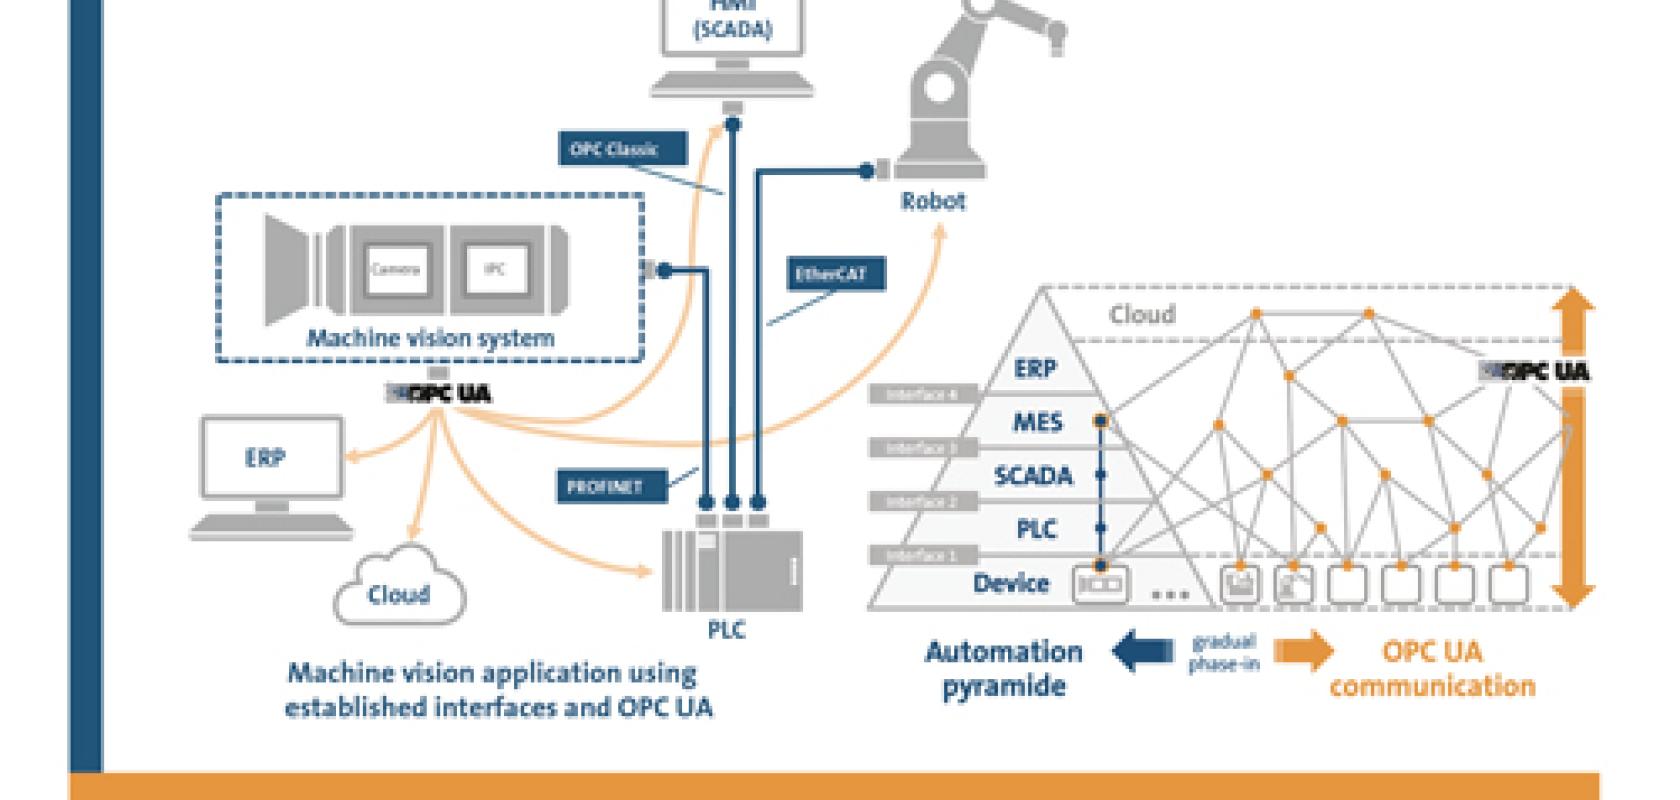 OPC UA vision specification to ease smart factory integration